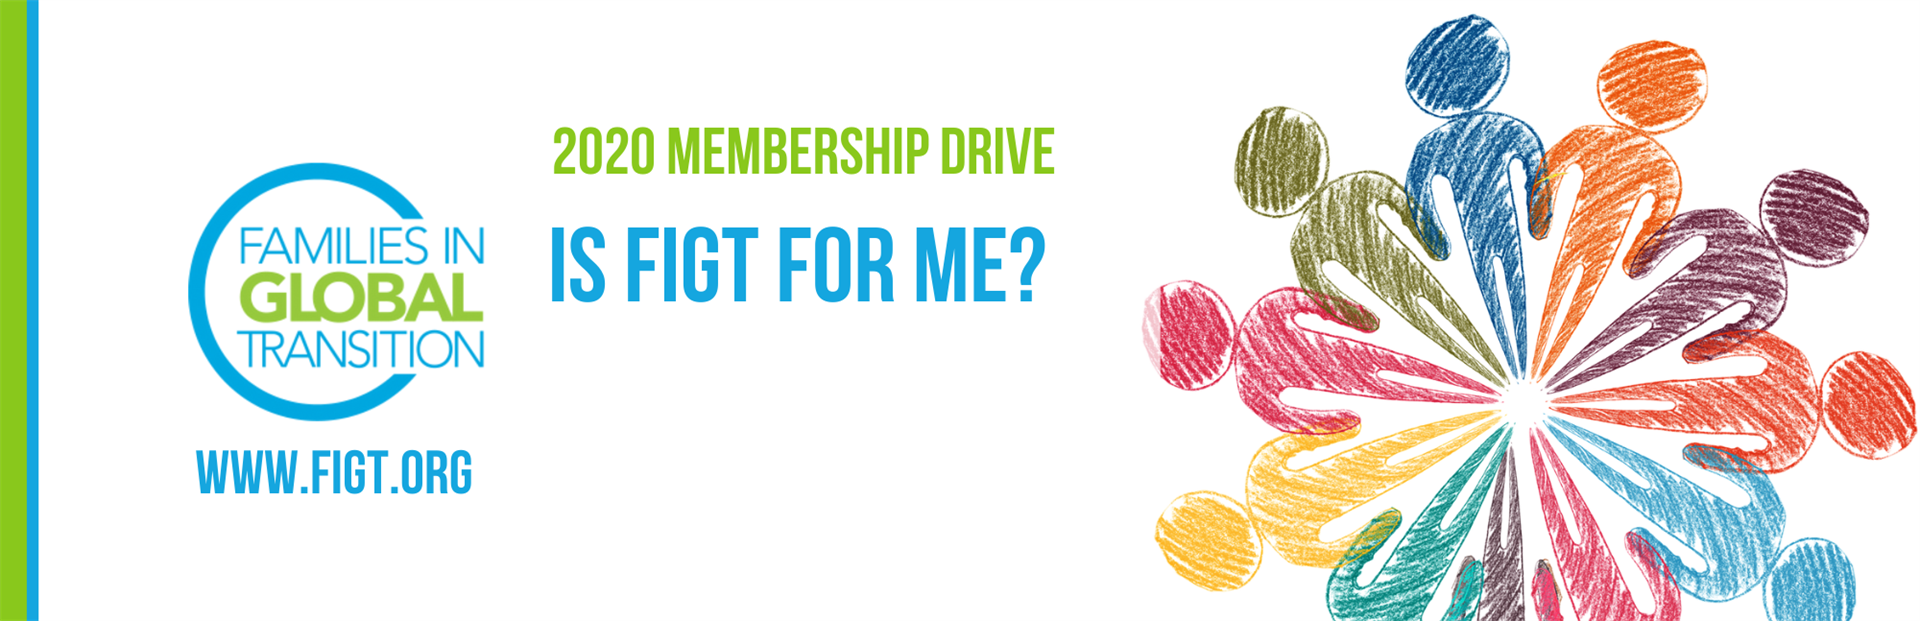 blog title: Is FIGT for me? 2020 Membership Drive